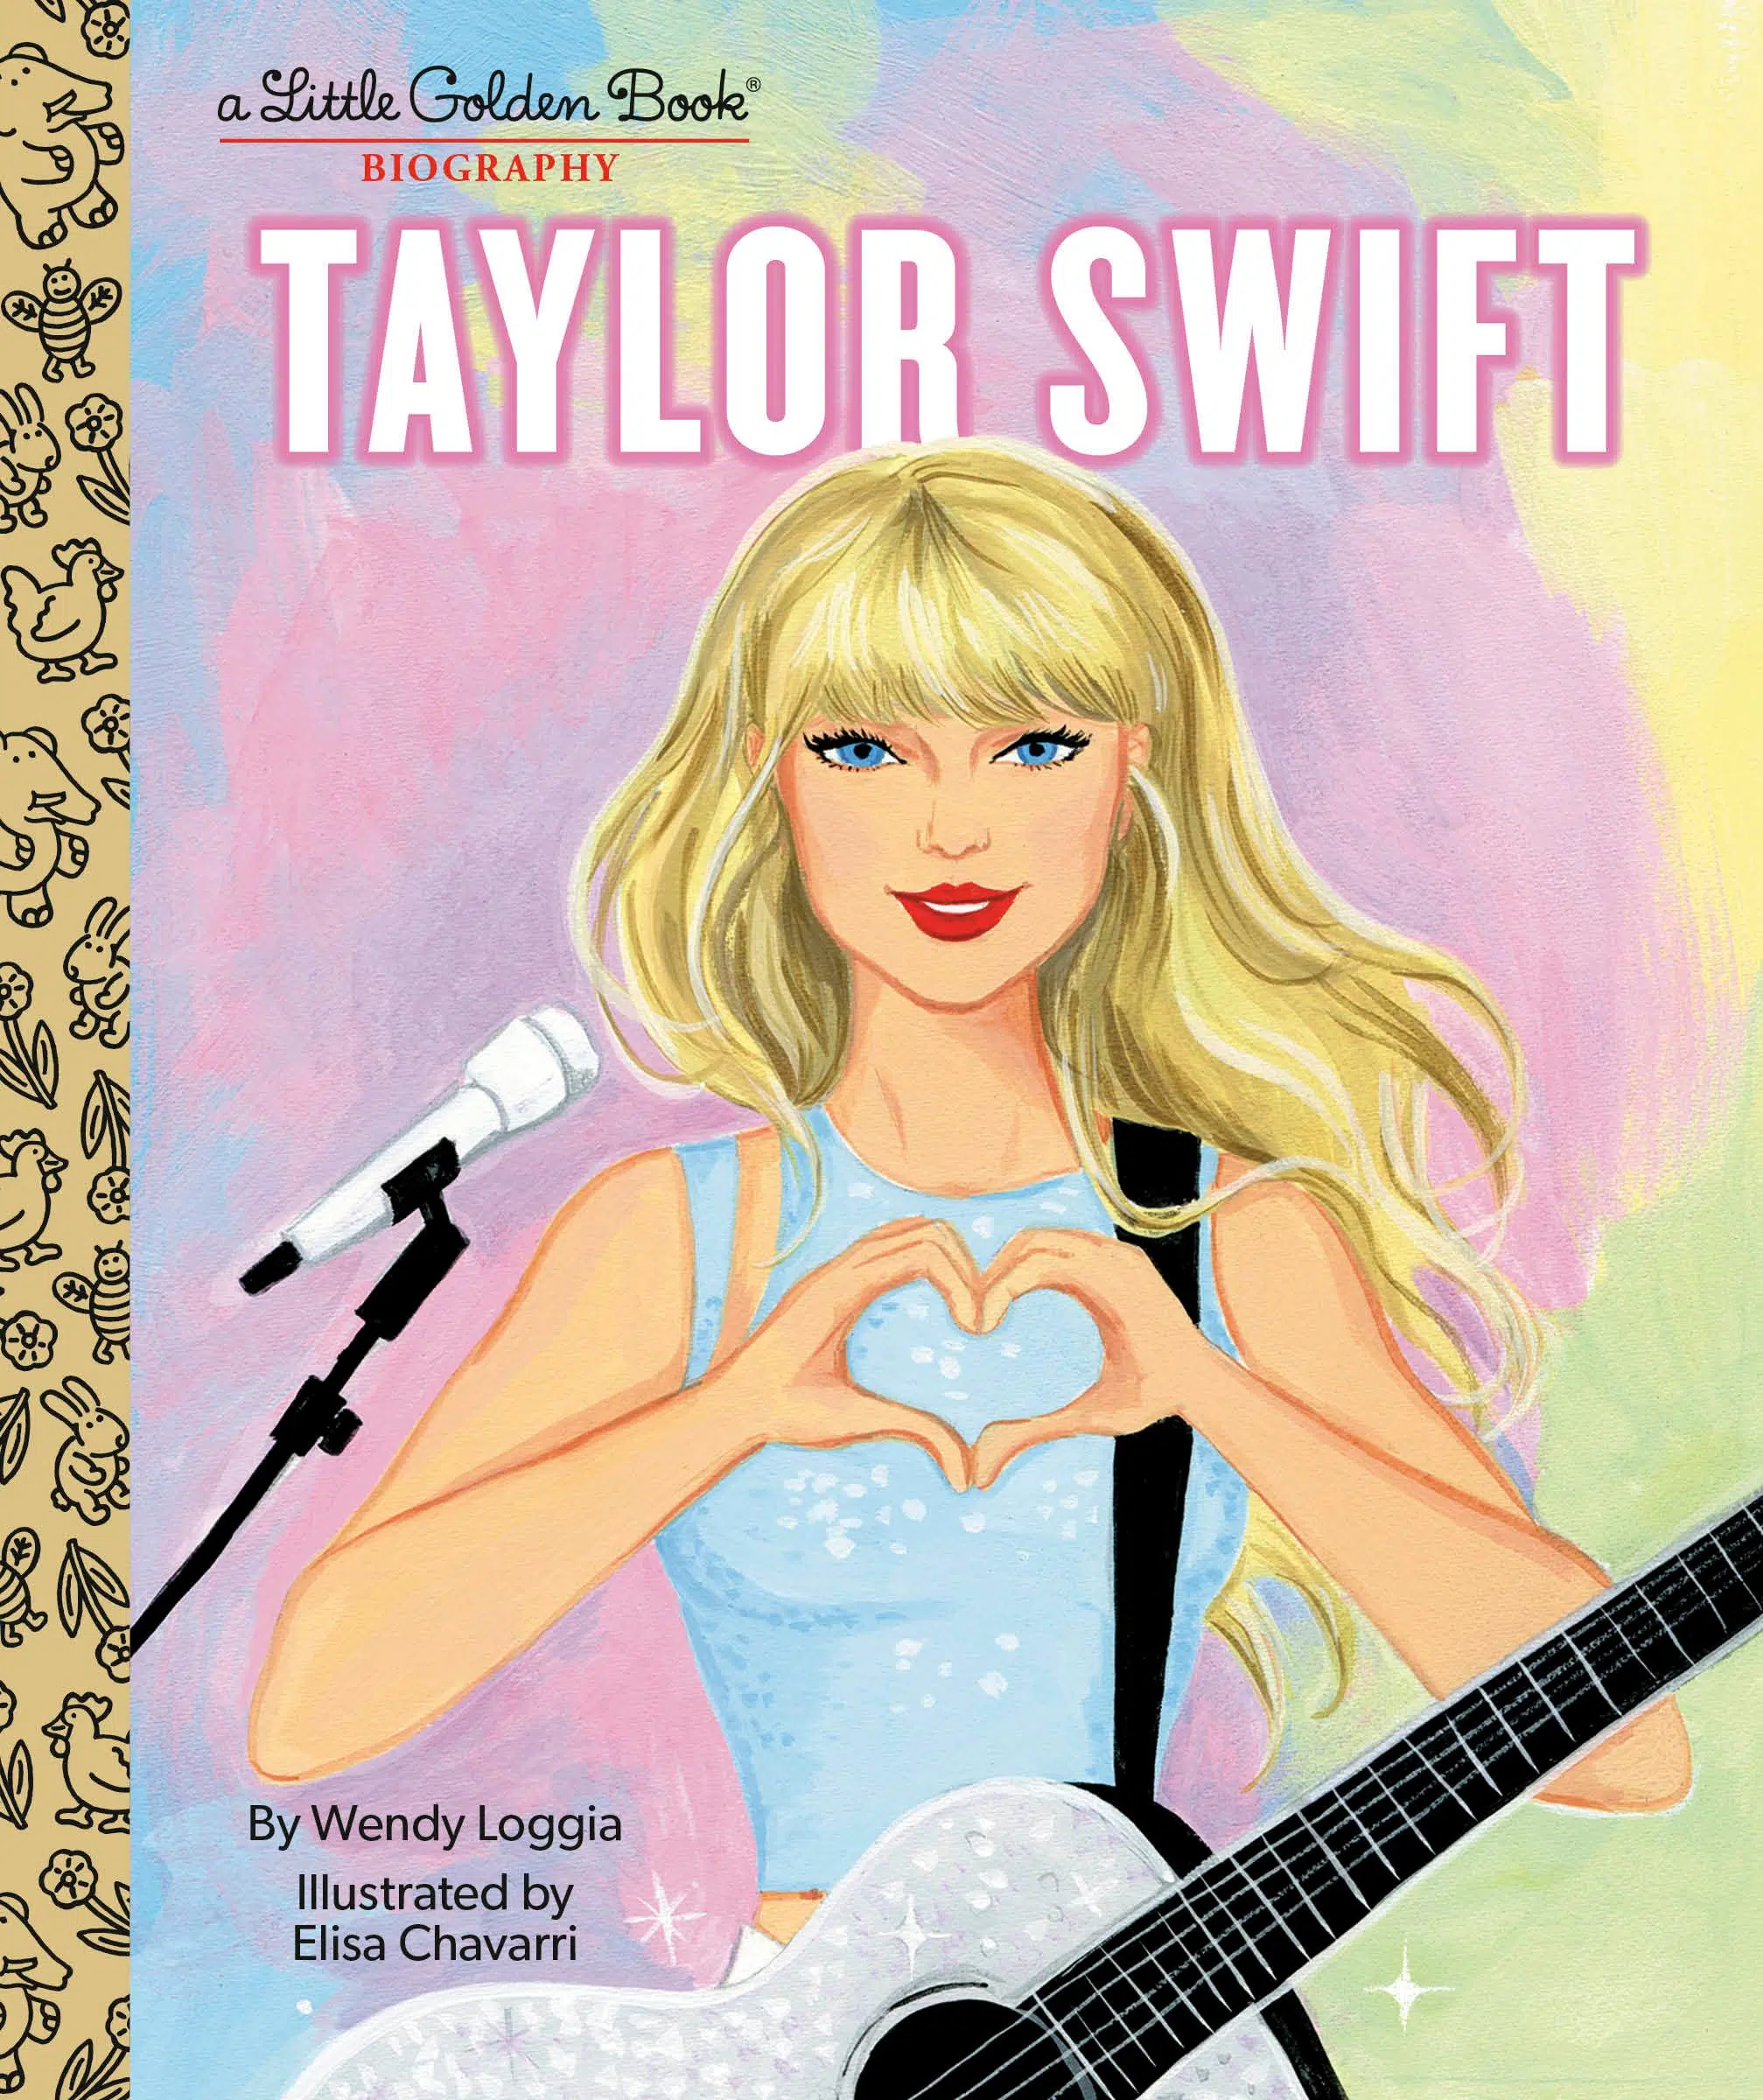 Children's Book About Taylor Swift is A Best Seller Before Even Going on Sale